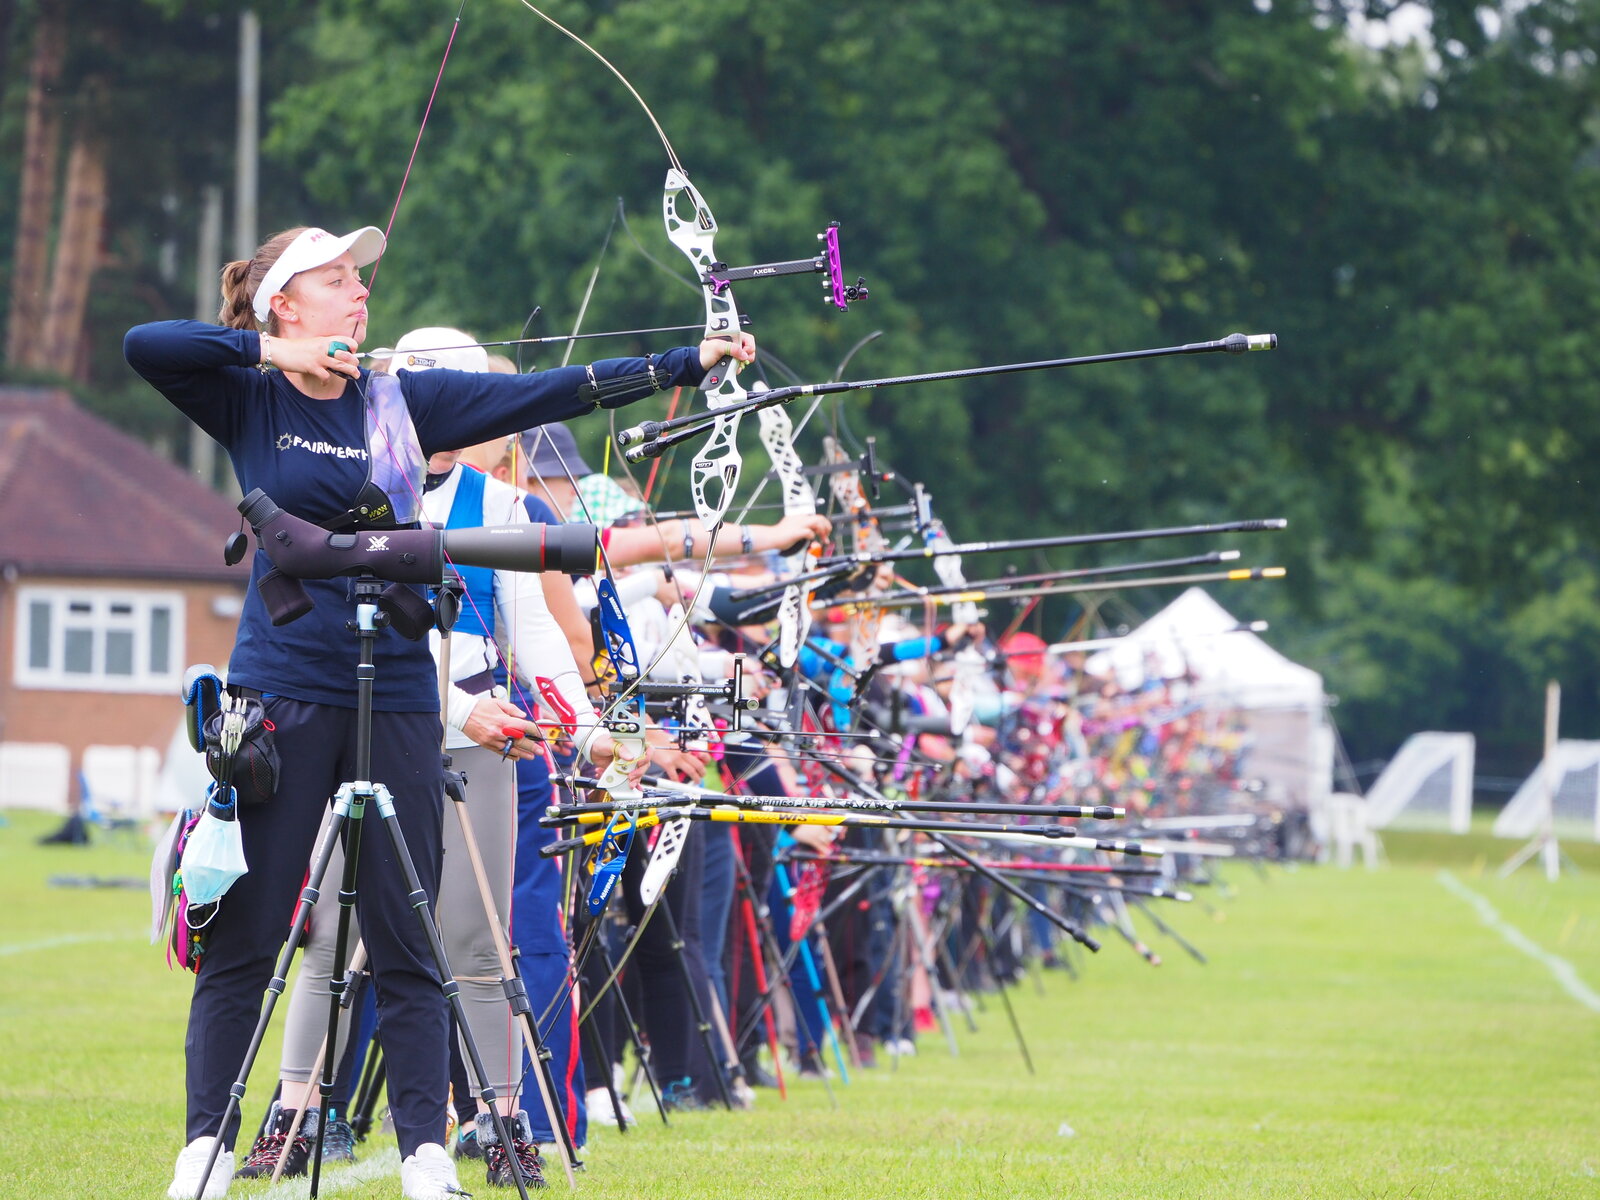 Archery GB National County Team Competition